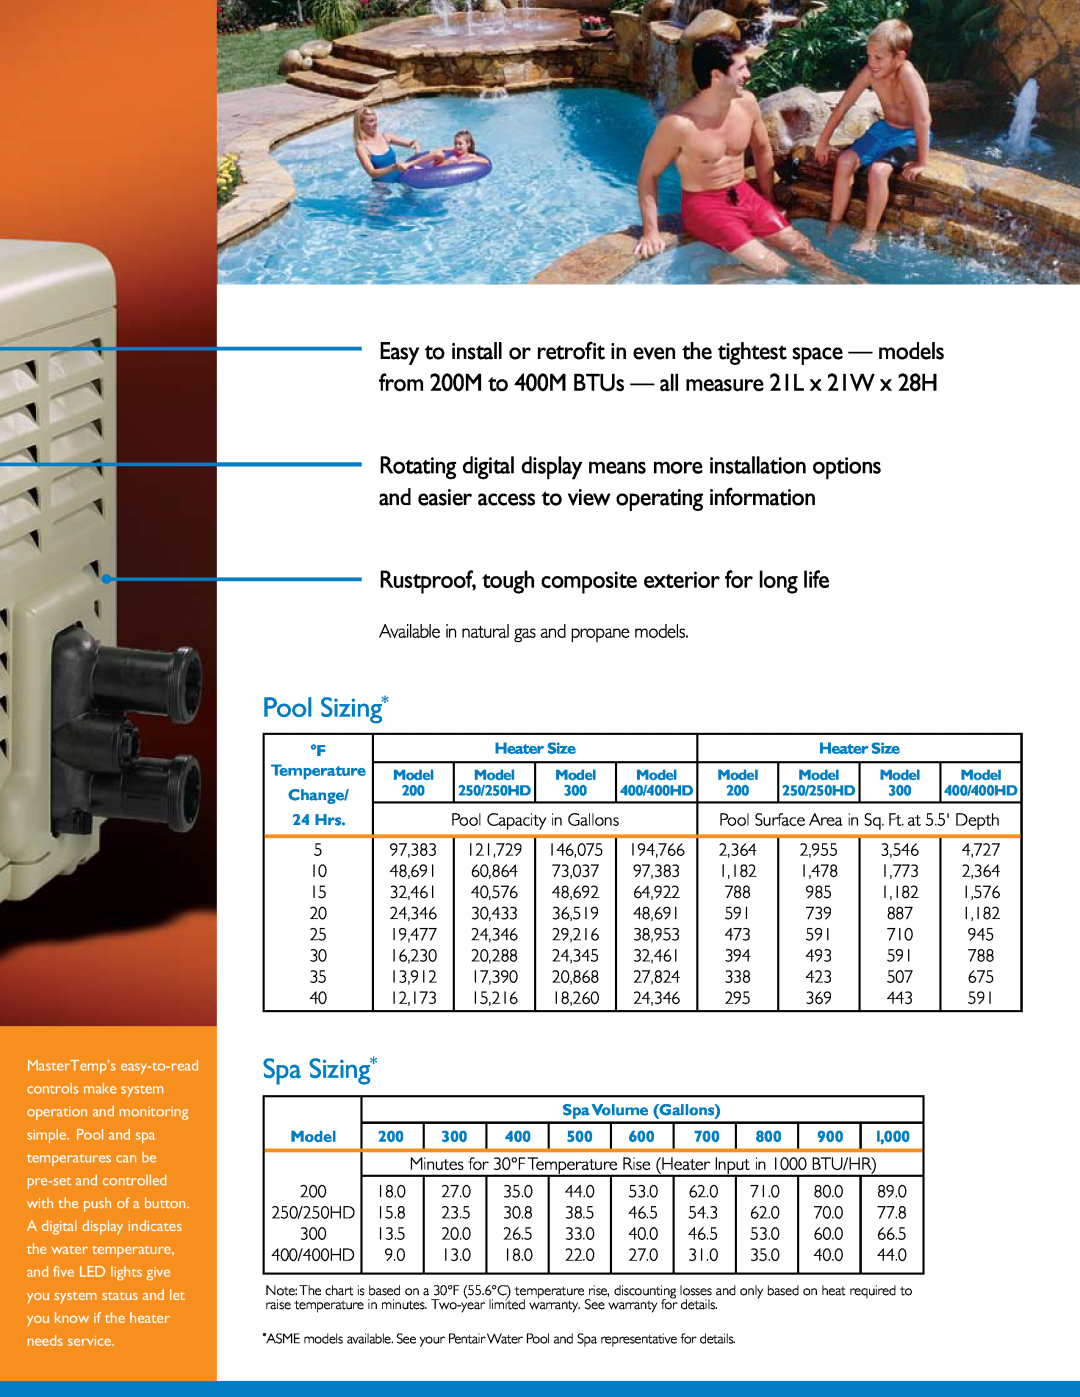 Pentair High Performance Heater manual Pool Sizing, Spa Sizing, Rustproof, tough composite exterior for long life 